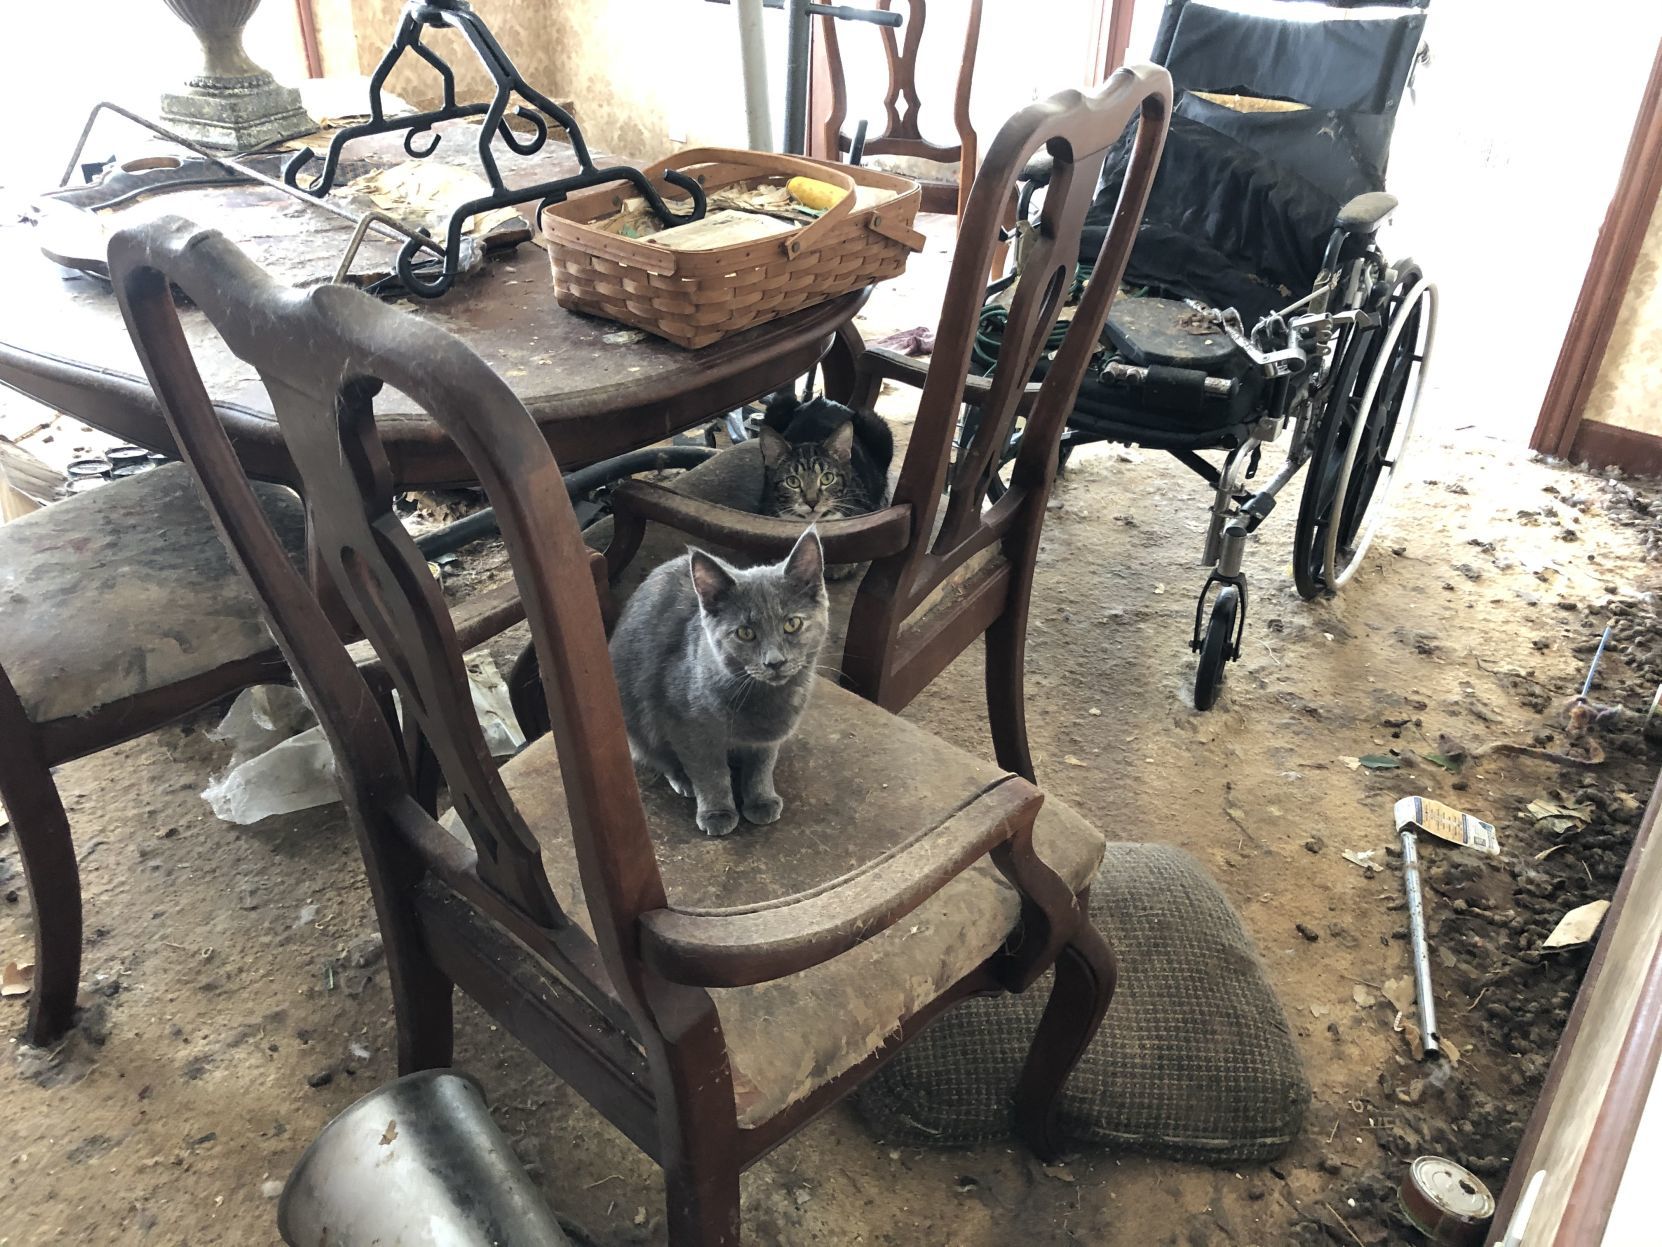 95 cats removed from Racine County home 